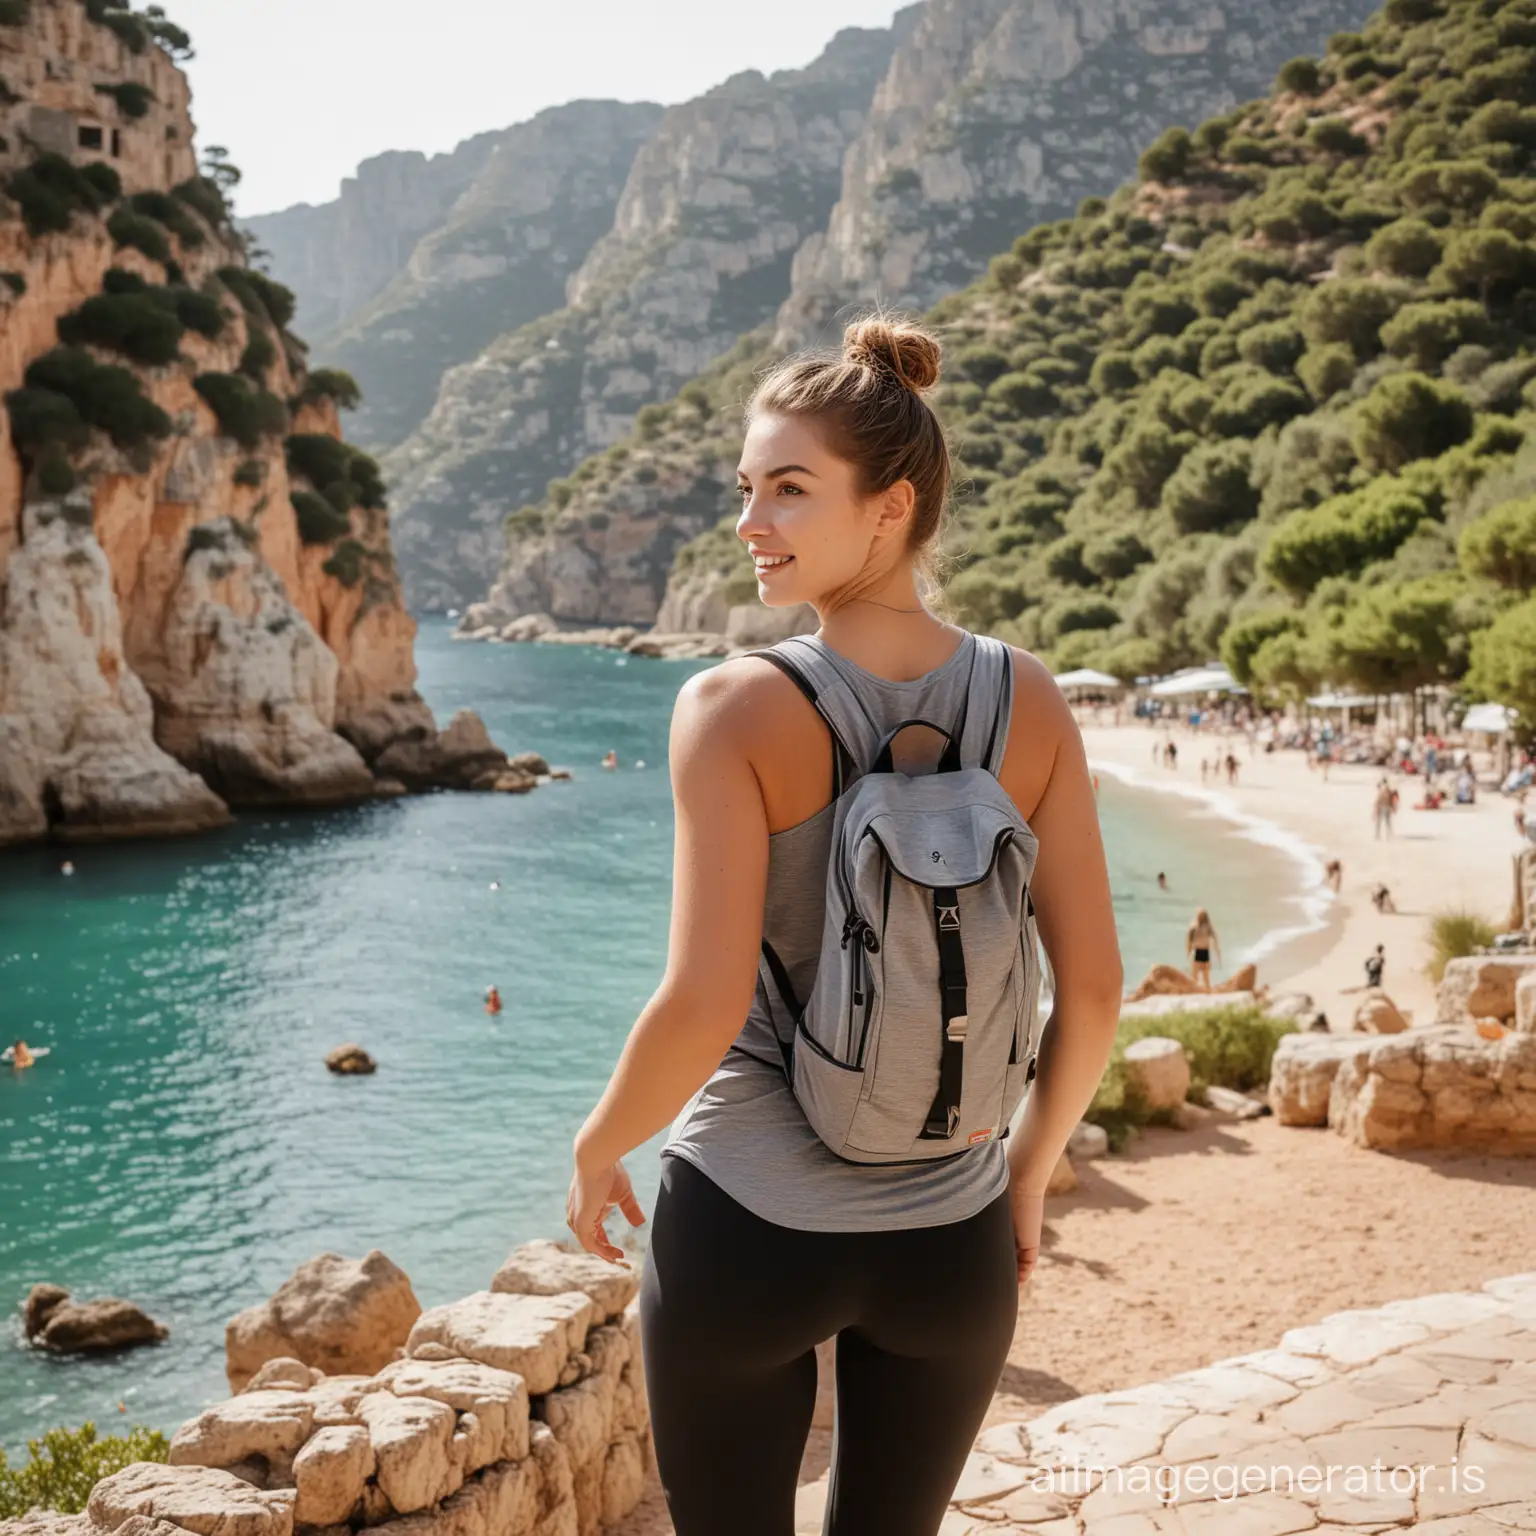 Twenty years old Auburn woman is a tourist in scenic Mallorca. She wears sporty outfit cropped 3/4 leggings and sport top, has backpack is on her back.